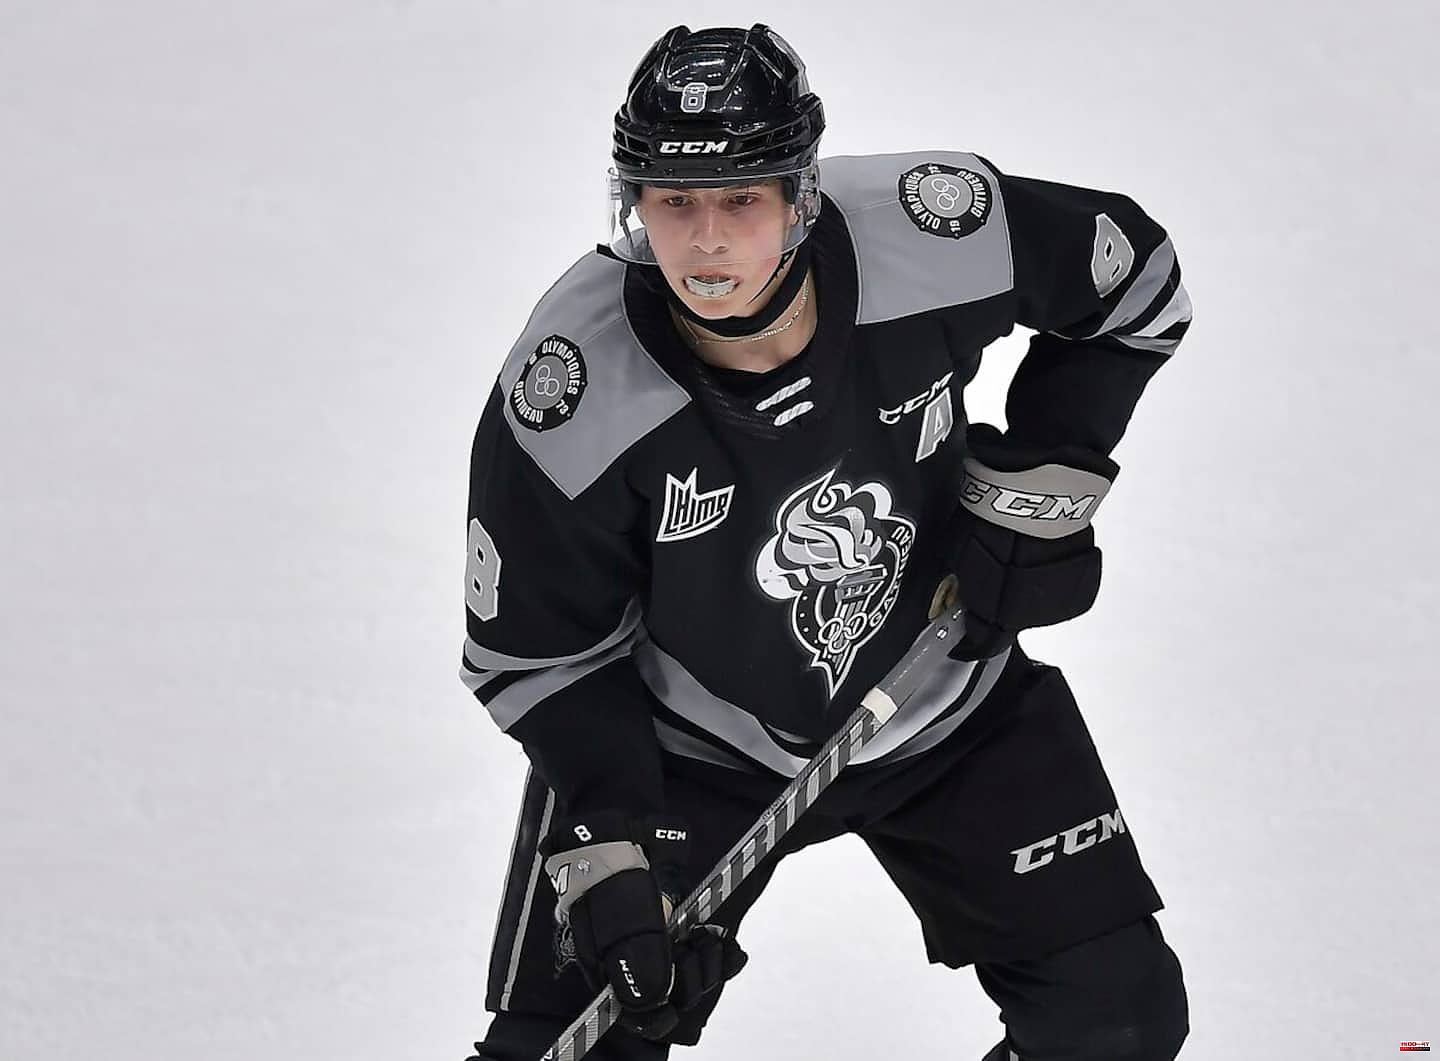 QMJHL: not too surprising names in the running for the Michael-Bossy